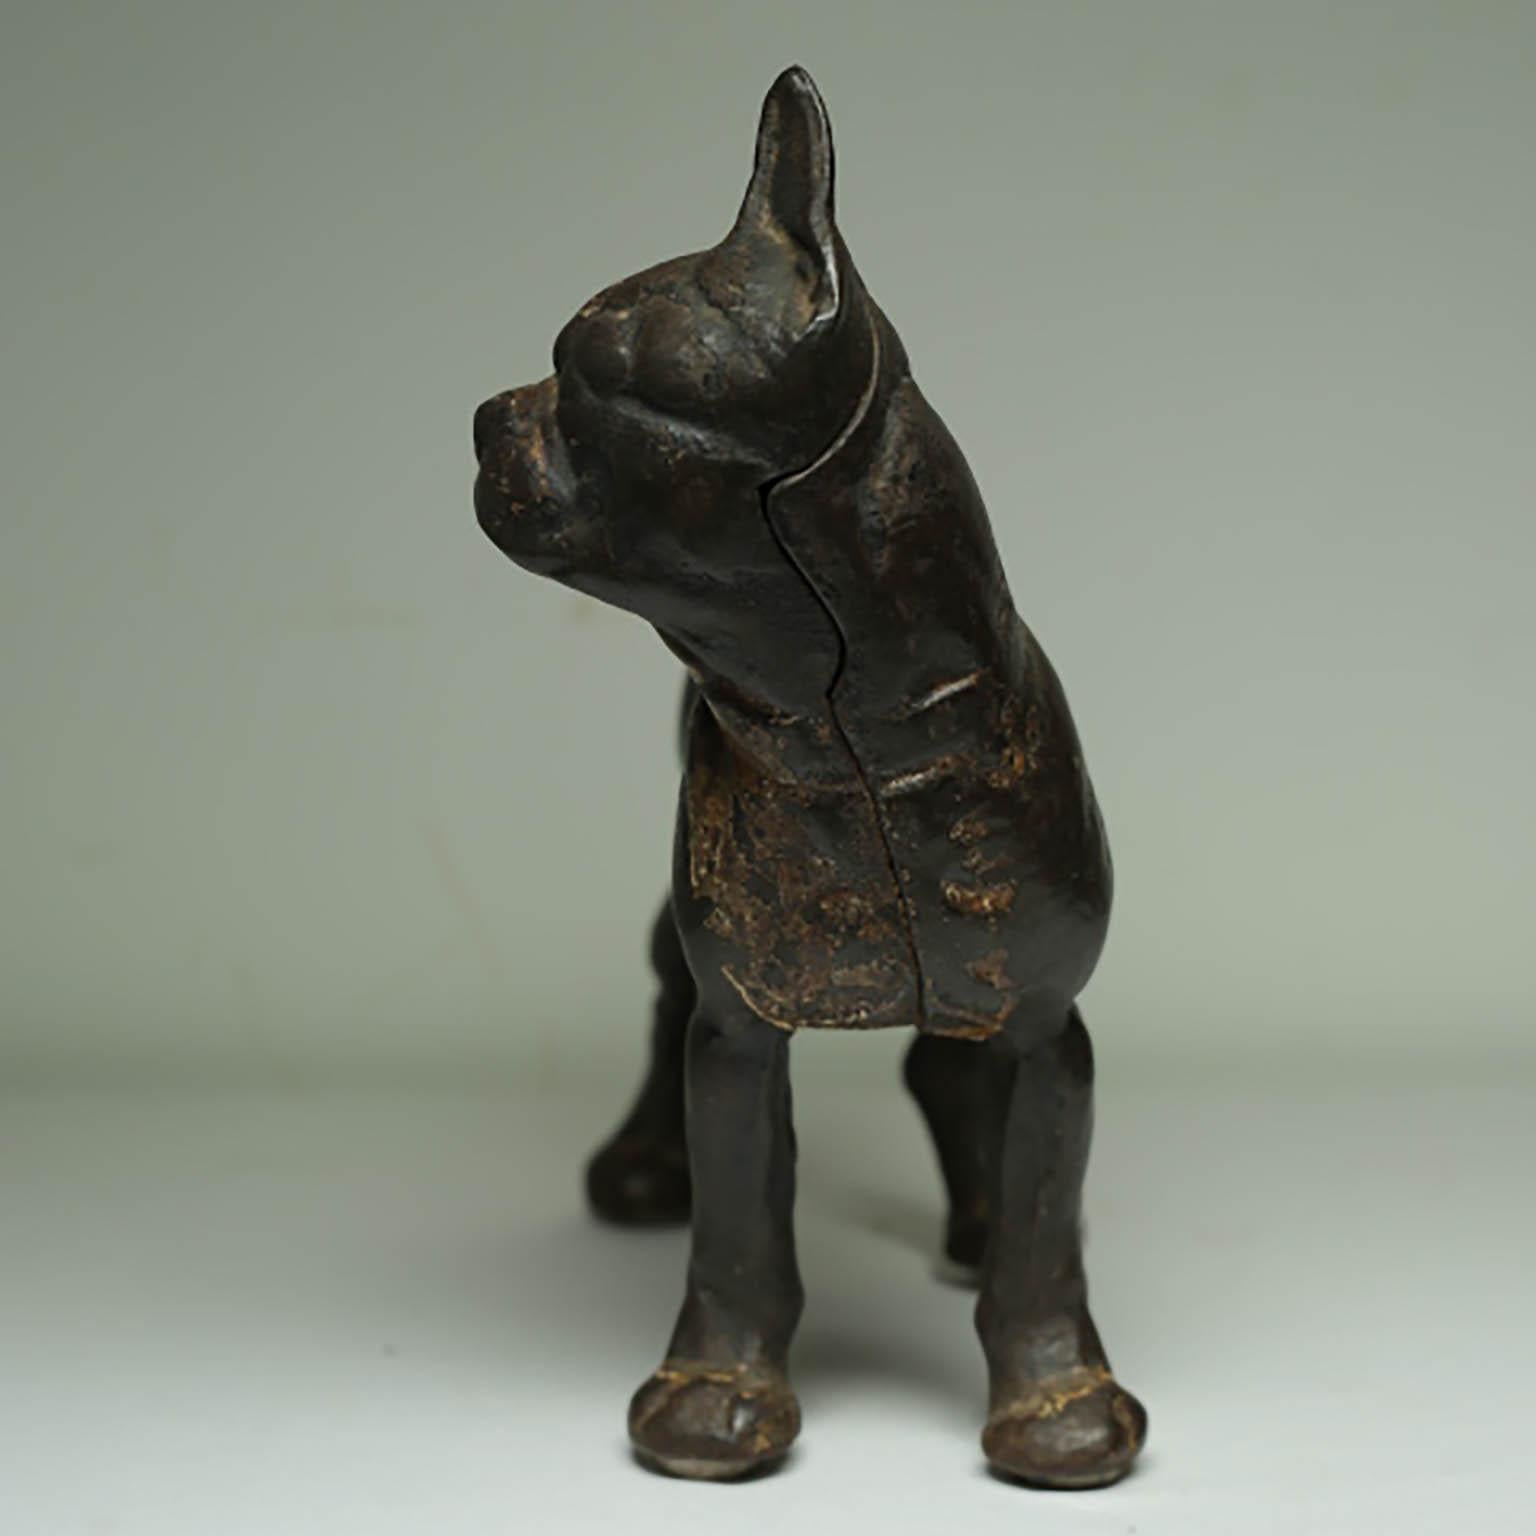 ABOUT

This is an original cast iron Boston Terrier doorstop manufactured by the Hubley Manufacturing Company in Lancaster Pennsylvania USA. The piece has retained its original hand painted finish and is in excellent condition with the appropriate